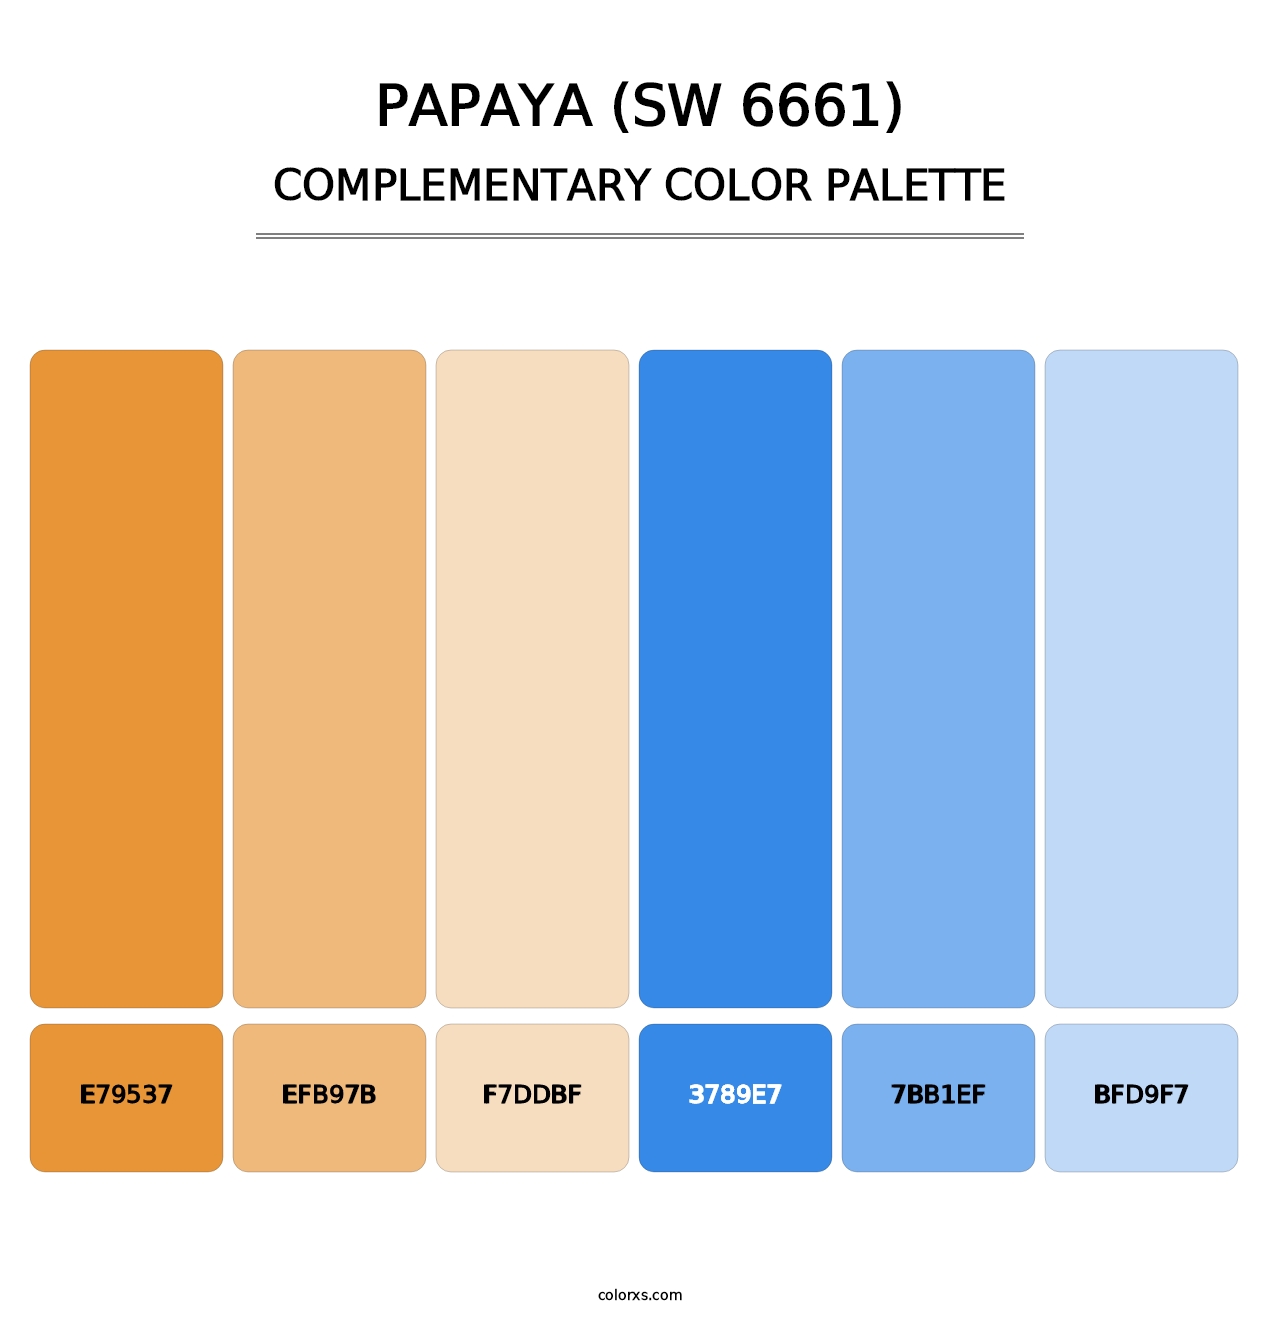 Papaya (SW 6661) - Complementary Color Palette